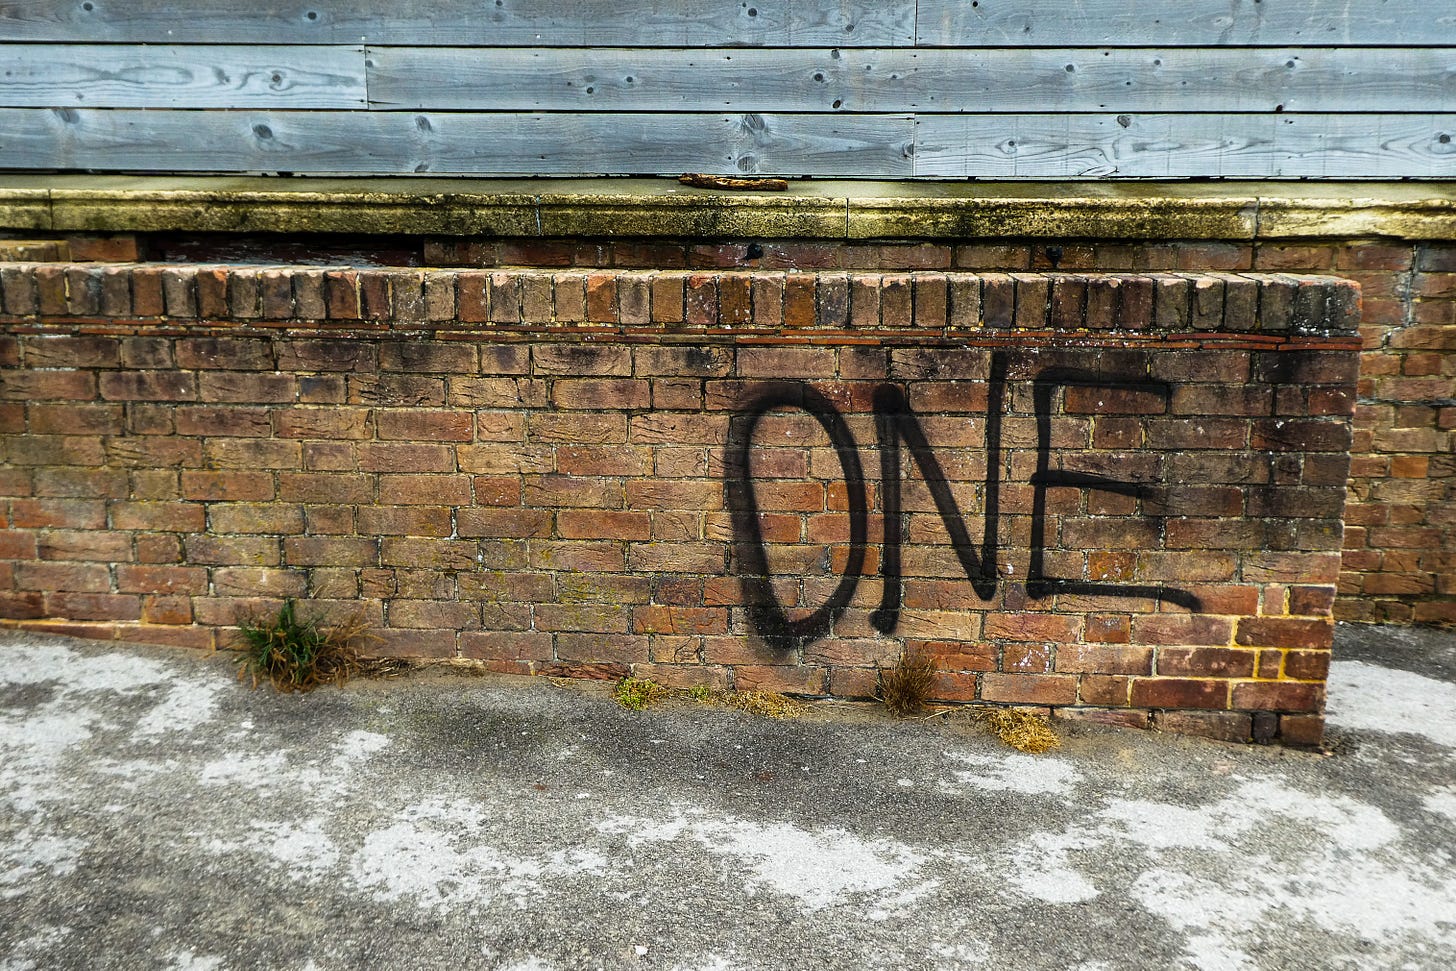 Brick wall with the word "one" spray painted on it in black